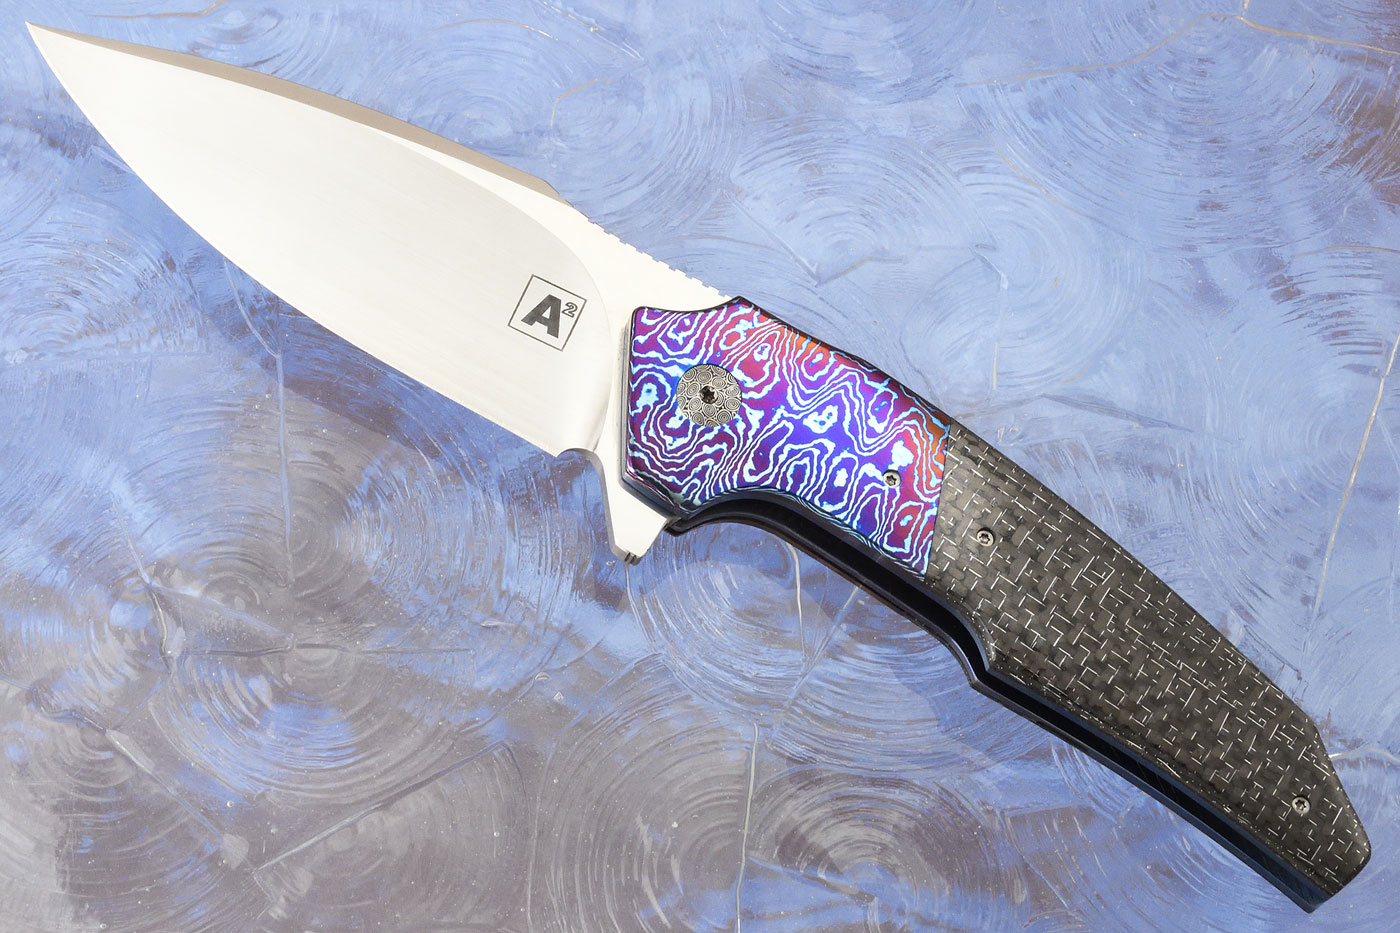 A6 Classic Flipper with Silver Strike Carbon Fiber and Timascus (Ceramic IKBS) - M390